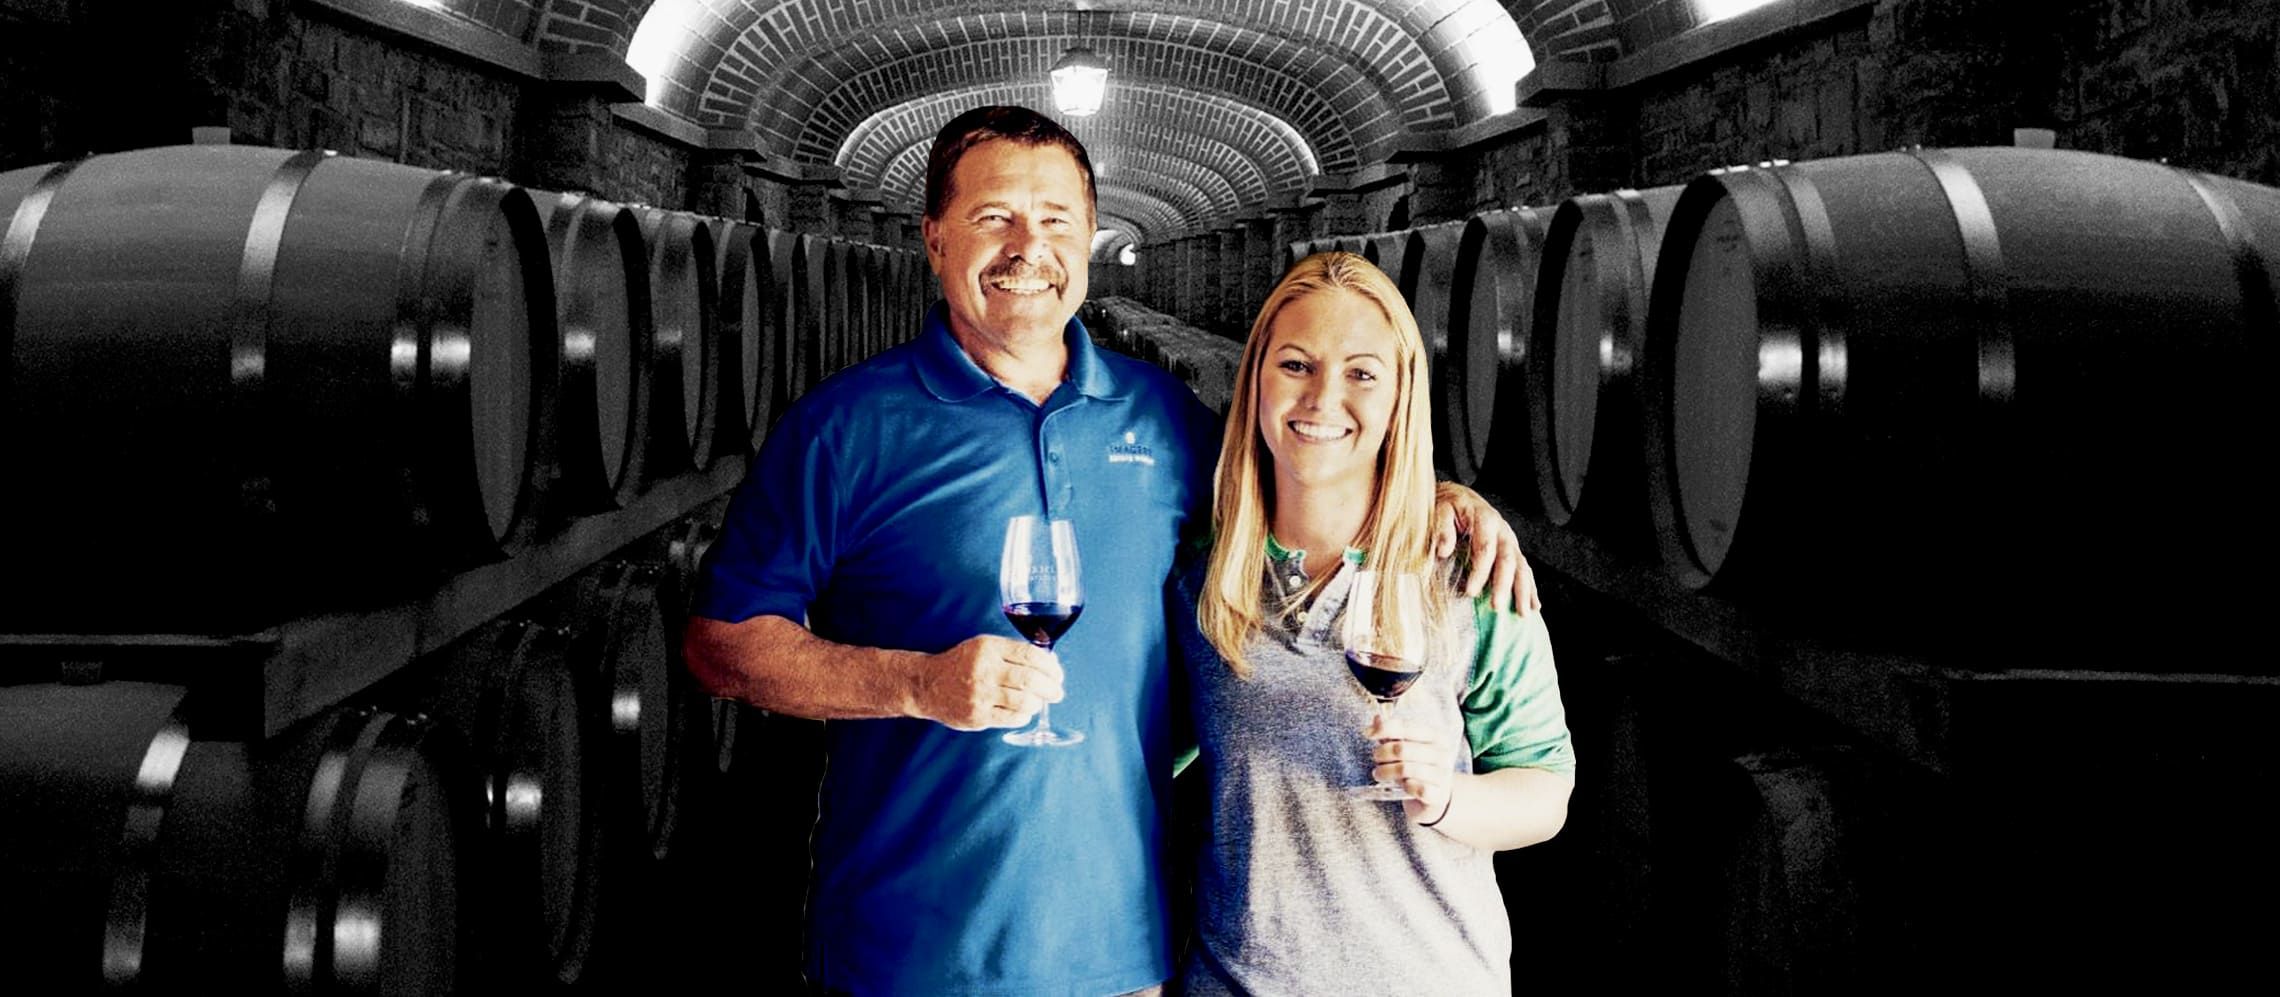 Photo for: Imagery Estate Winery Wins at a Leading Wine Competition